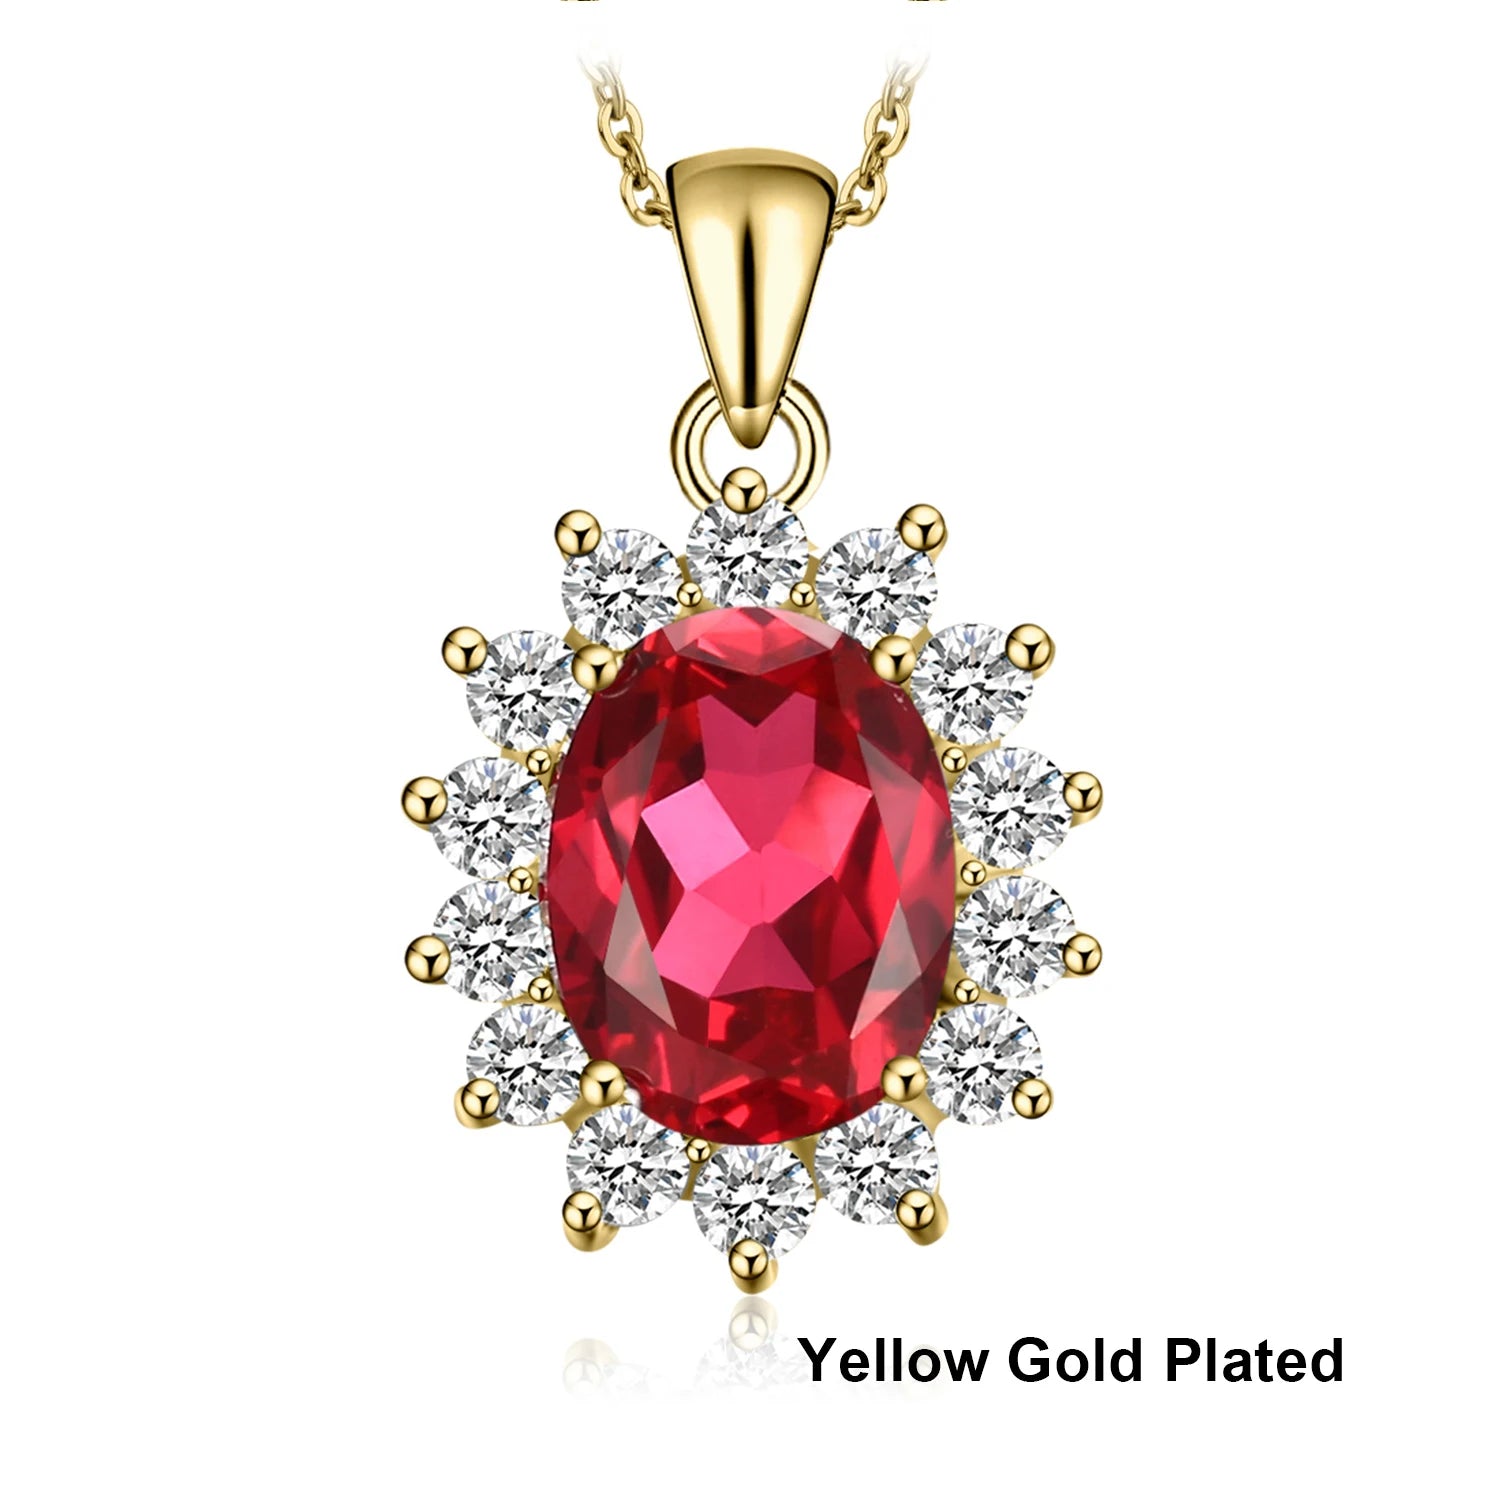 Jewelrypalace Created Alexandrite Natural Amethyst Garnet 925 Sterling Silver Pendant Necklace No Chain Yellow Rose Gold Plated Created Ruby